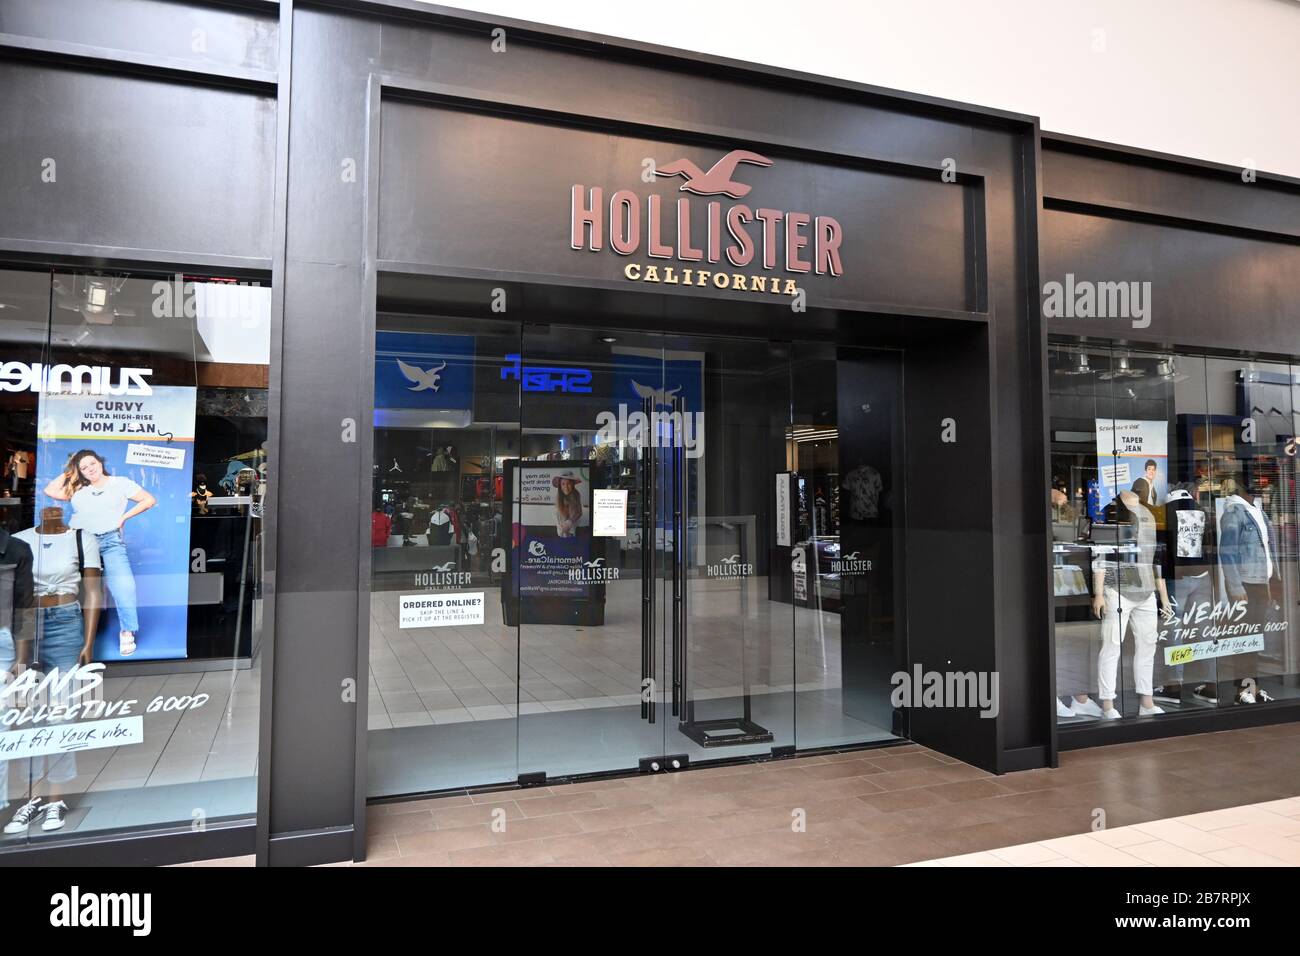 General overall view of the Hollister store at the Los Cerritos Center mall, Tuesday, March 17, 2020, in Cerritos, Calif. The shopping center has reduced hours and stores have closed because of the coronavirus COVID-19 pandemic outbreak. (Photo by IOS/Espa-Images) Stock Photo